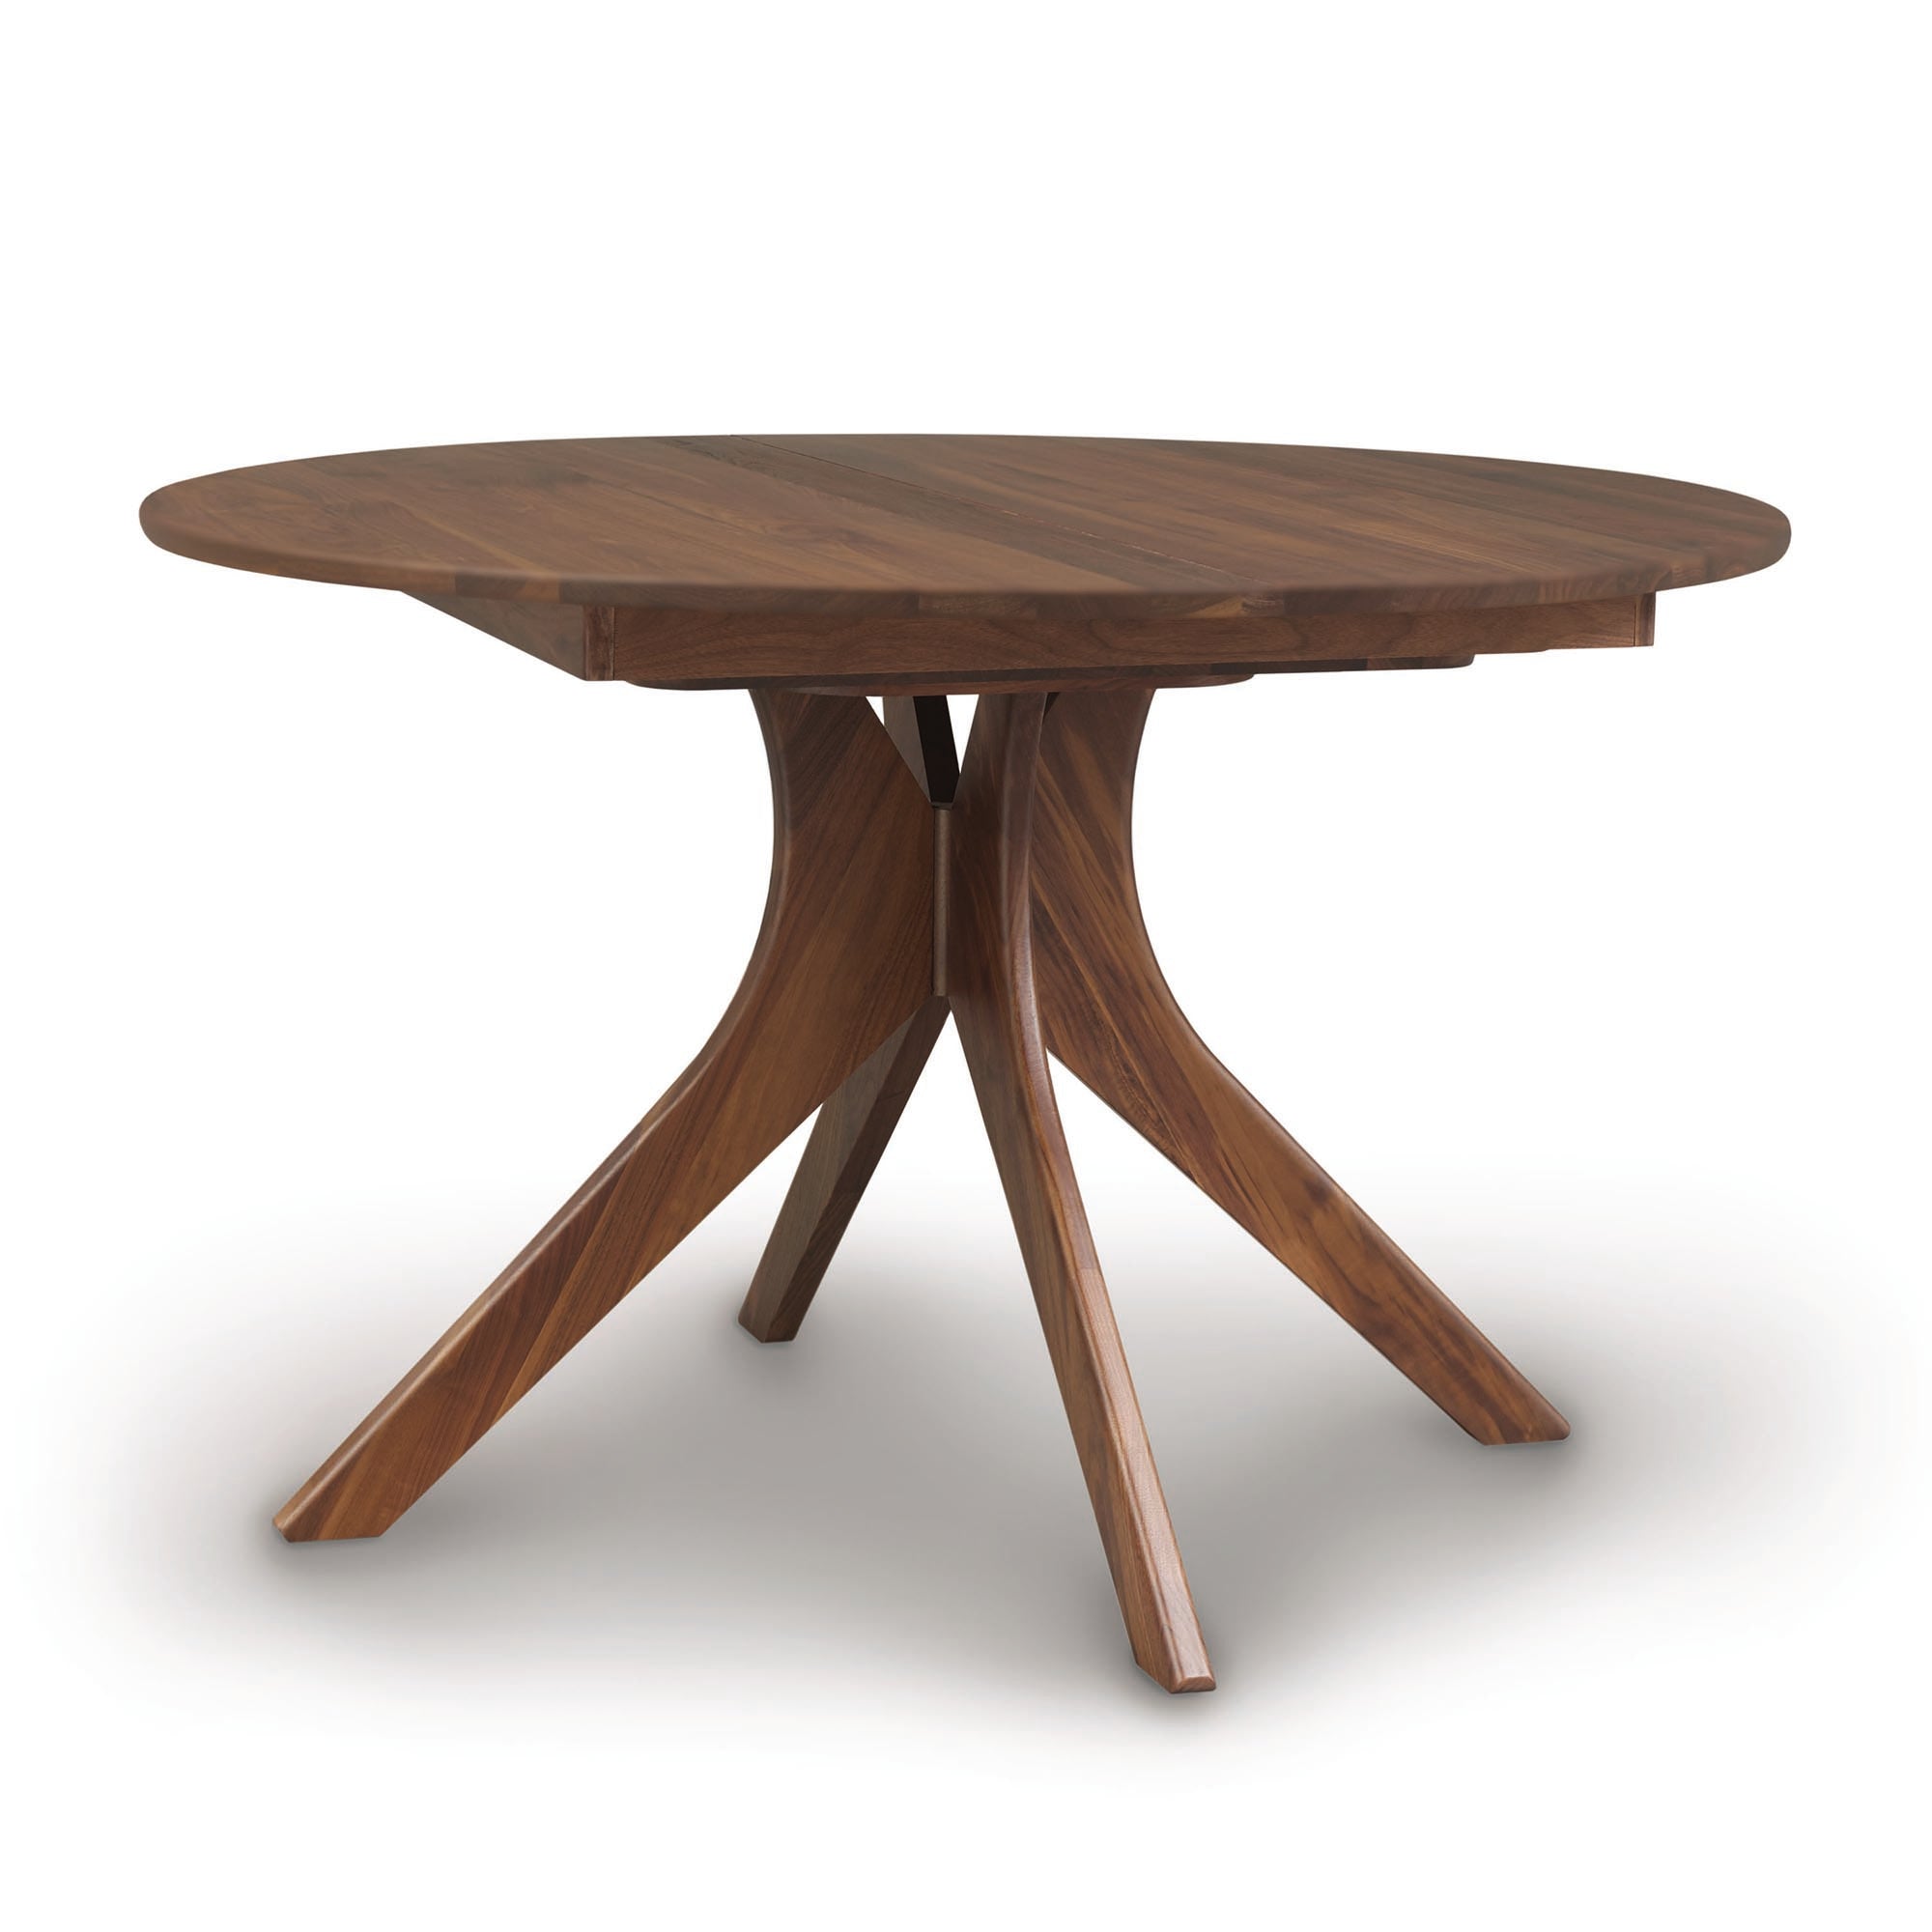 Audrey Dining Table - Fixed Top